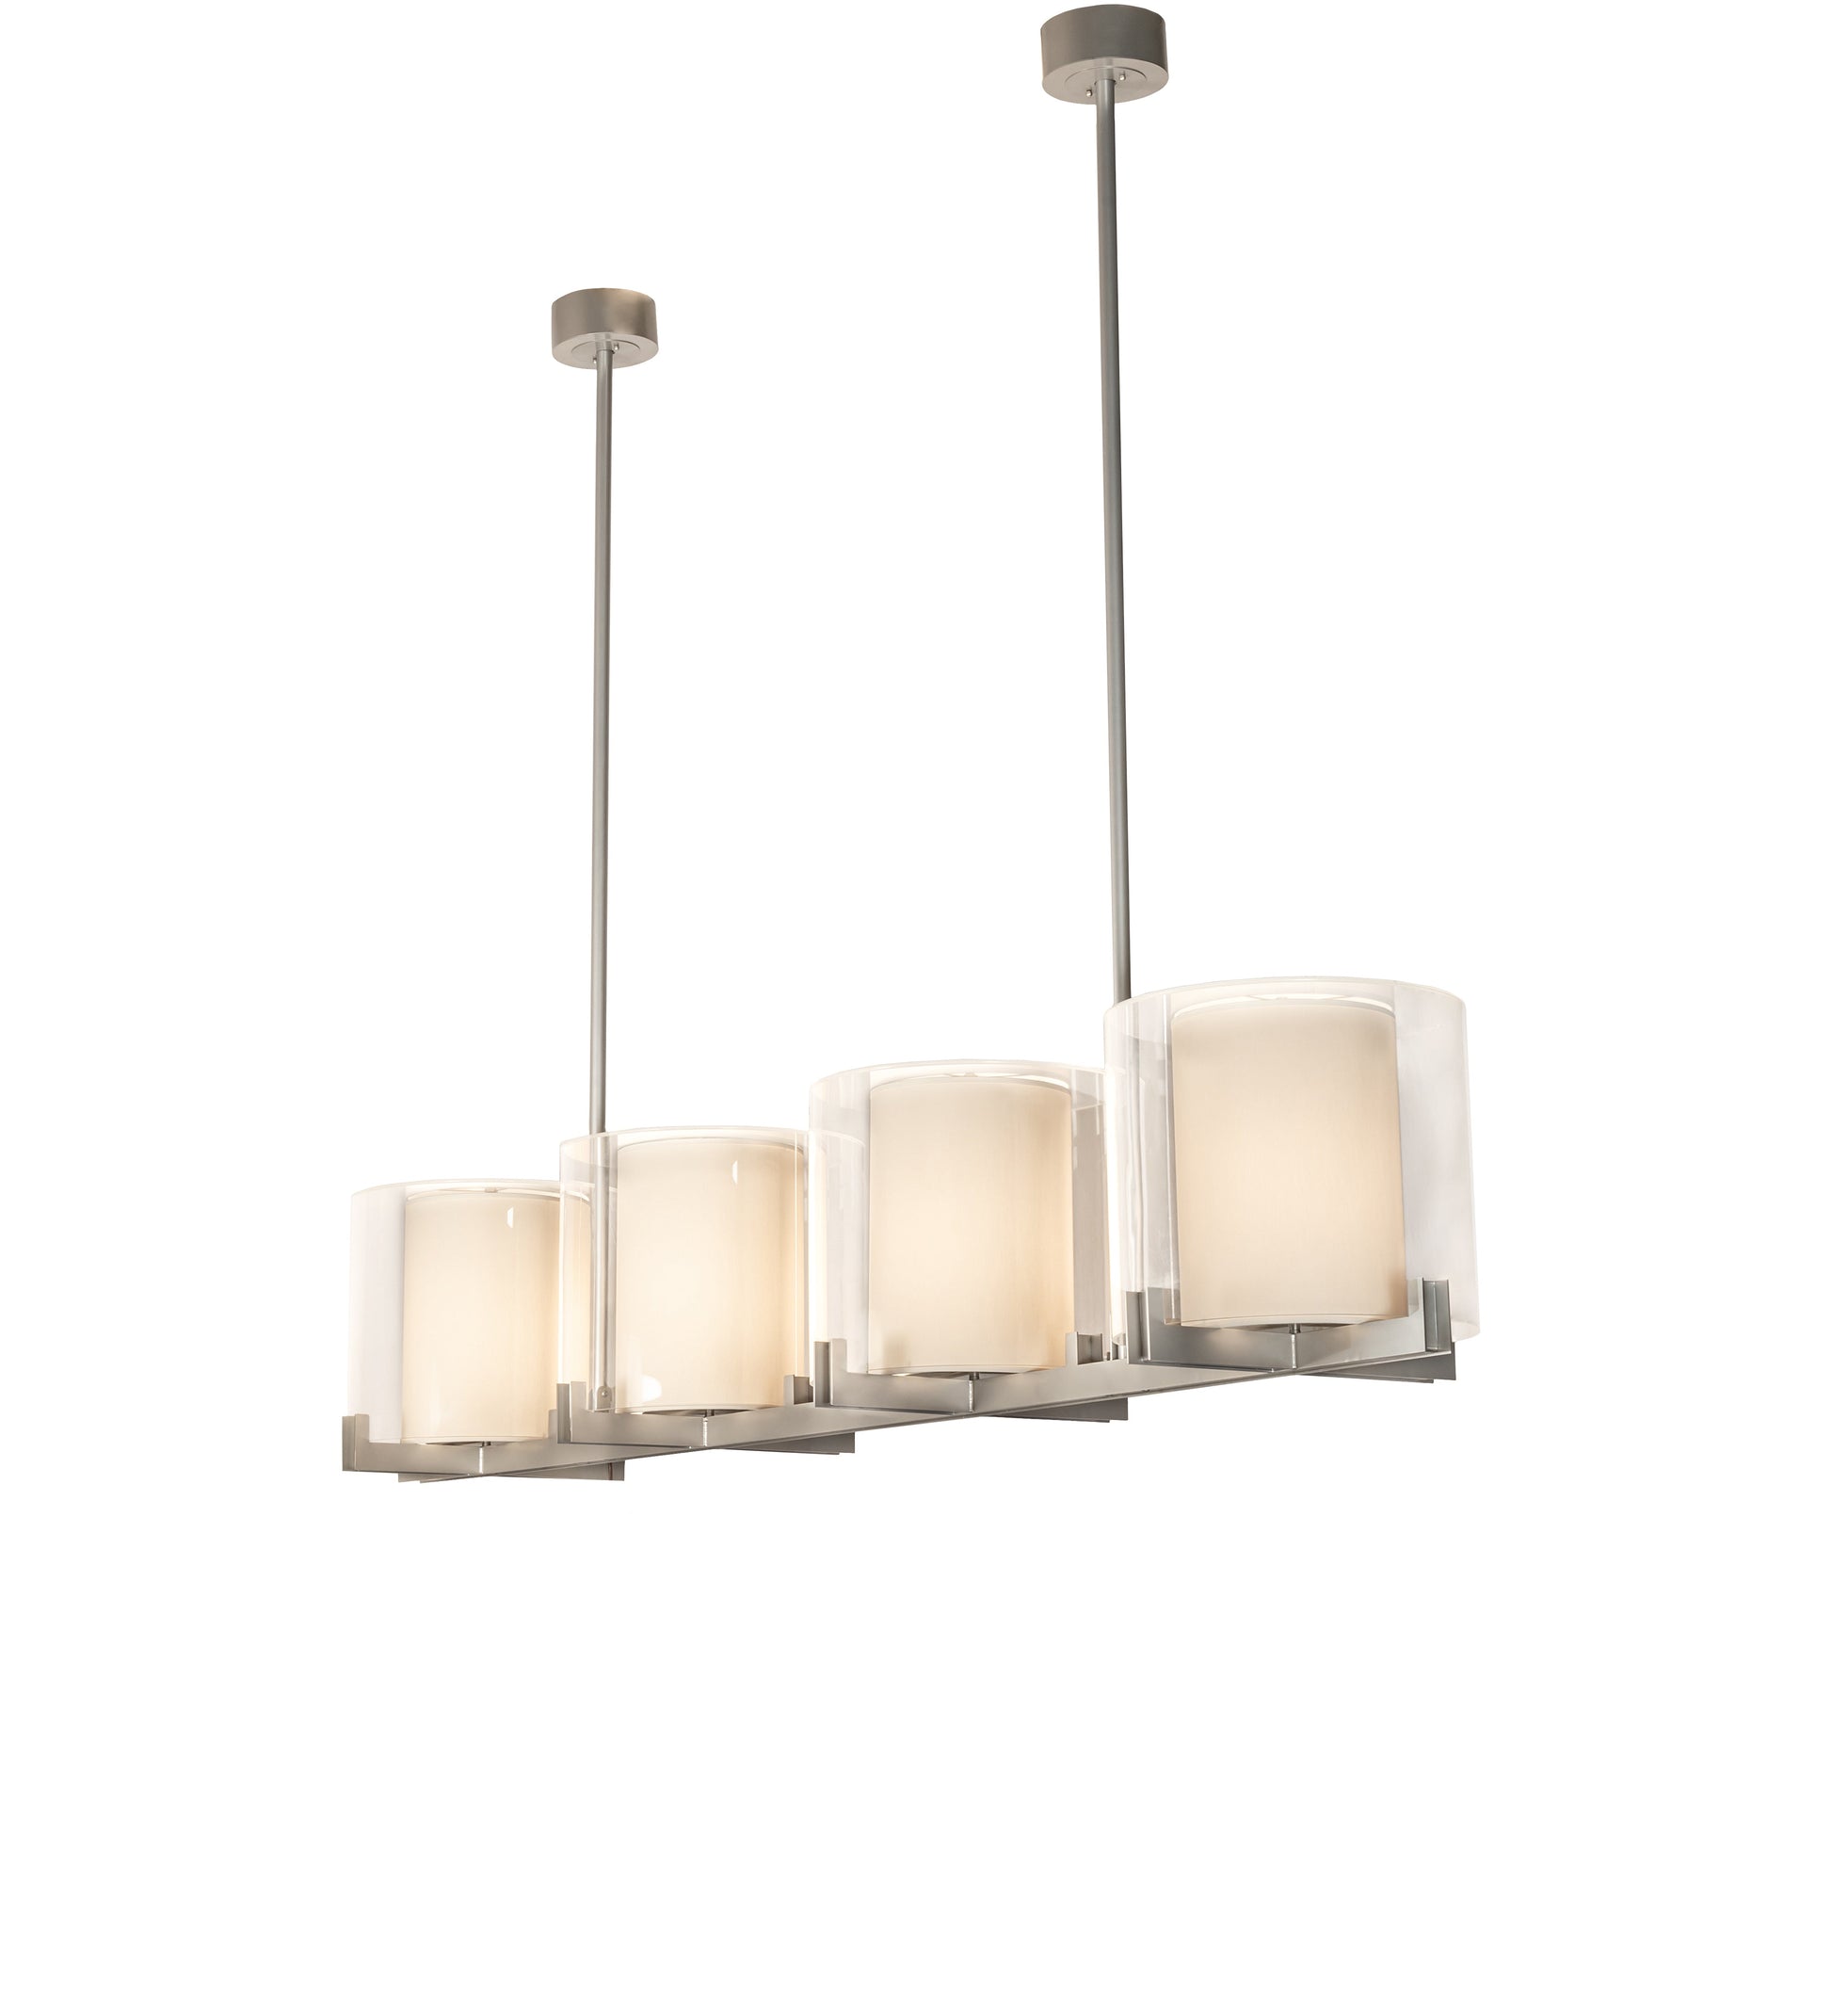 98" Long Crawford Oblong Pendant by 2nd Ave Lighting